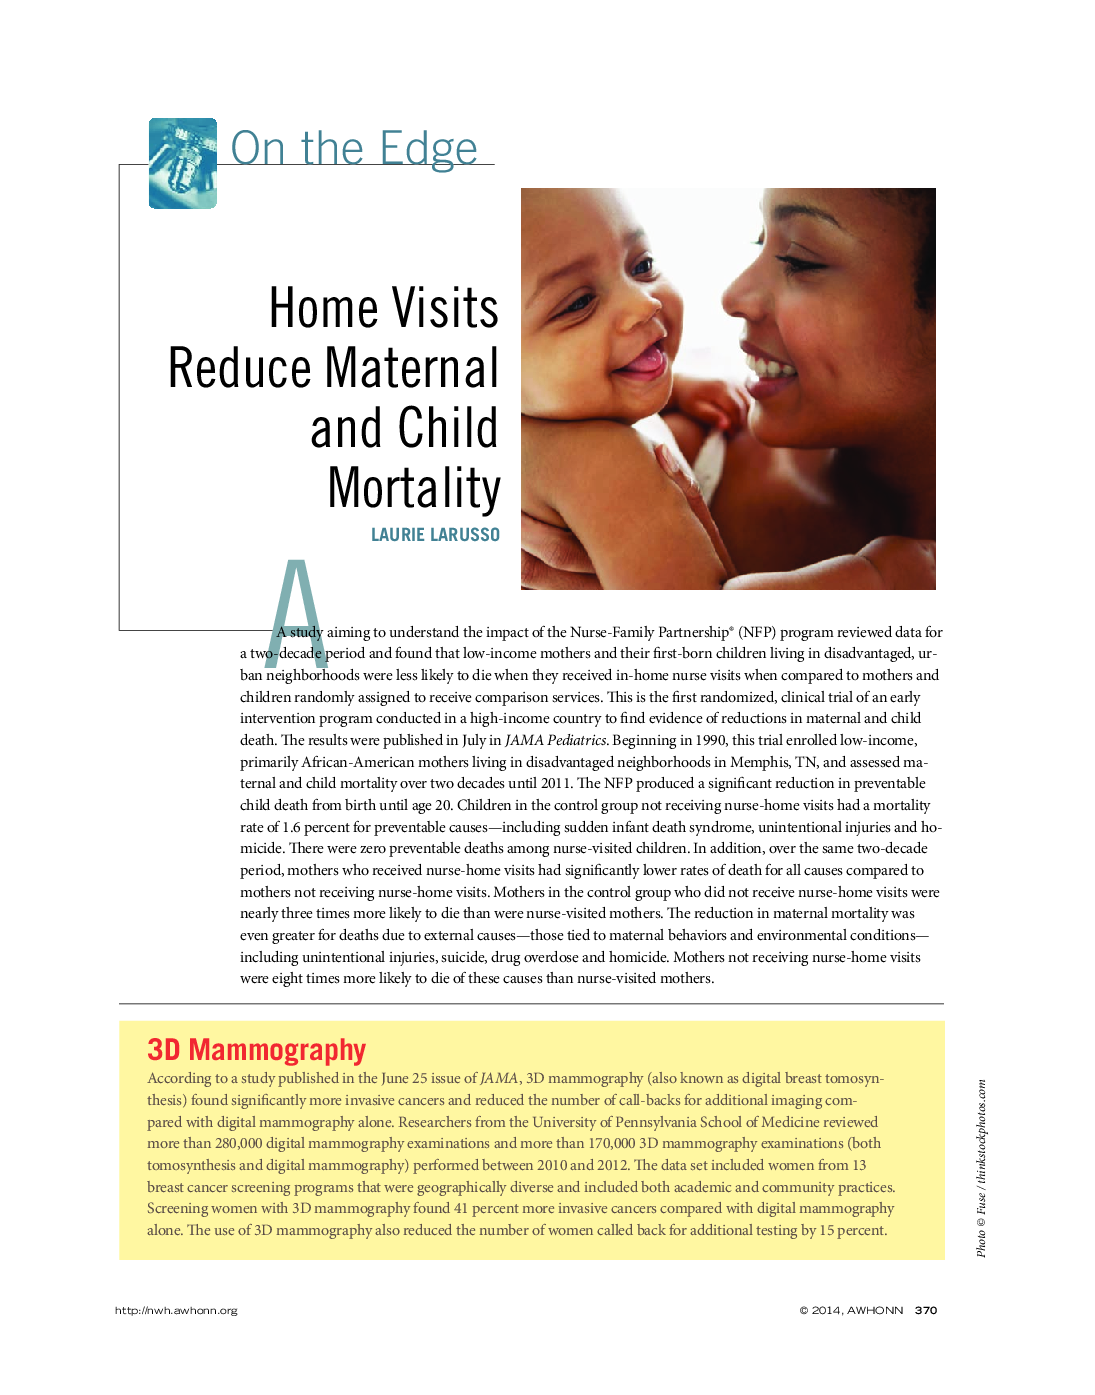 Home Visits Reduce Maternal and Child Mortality